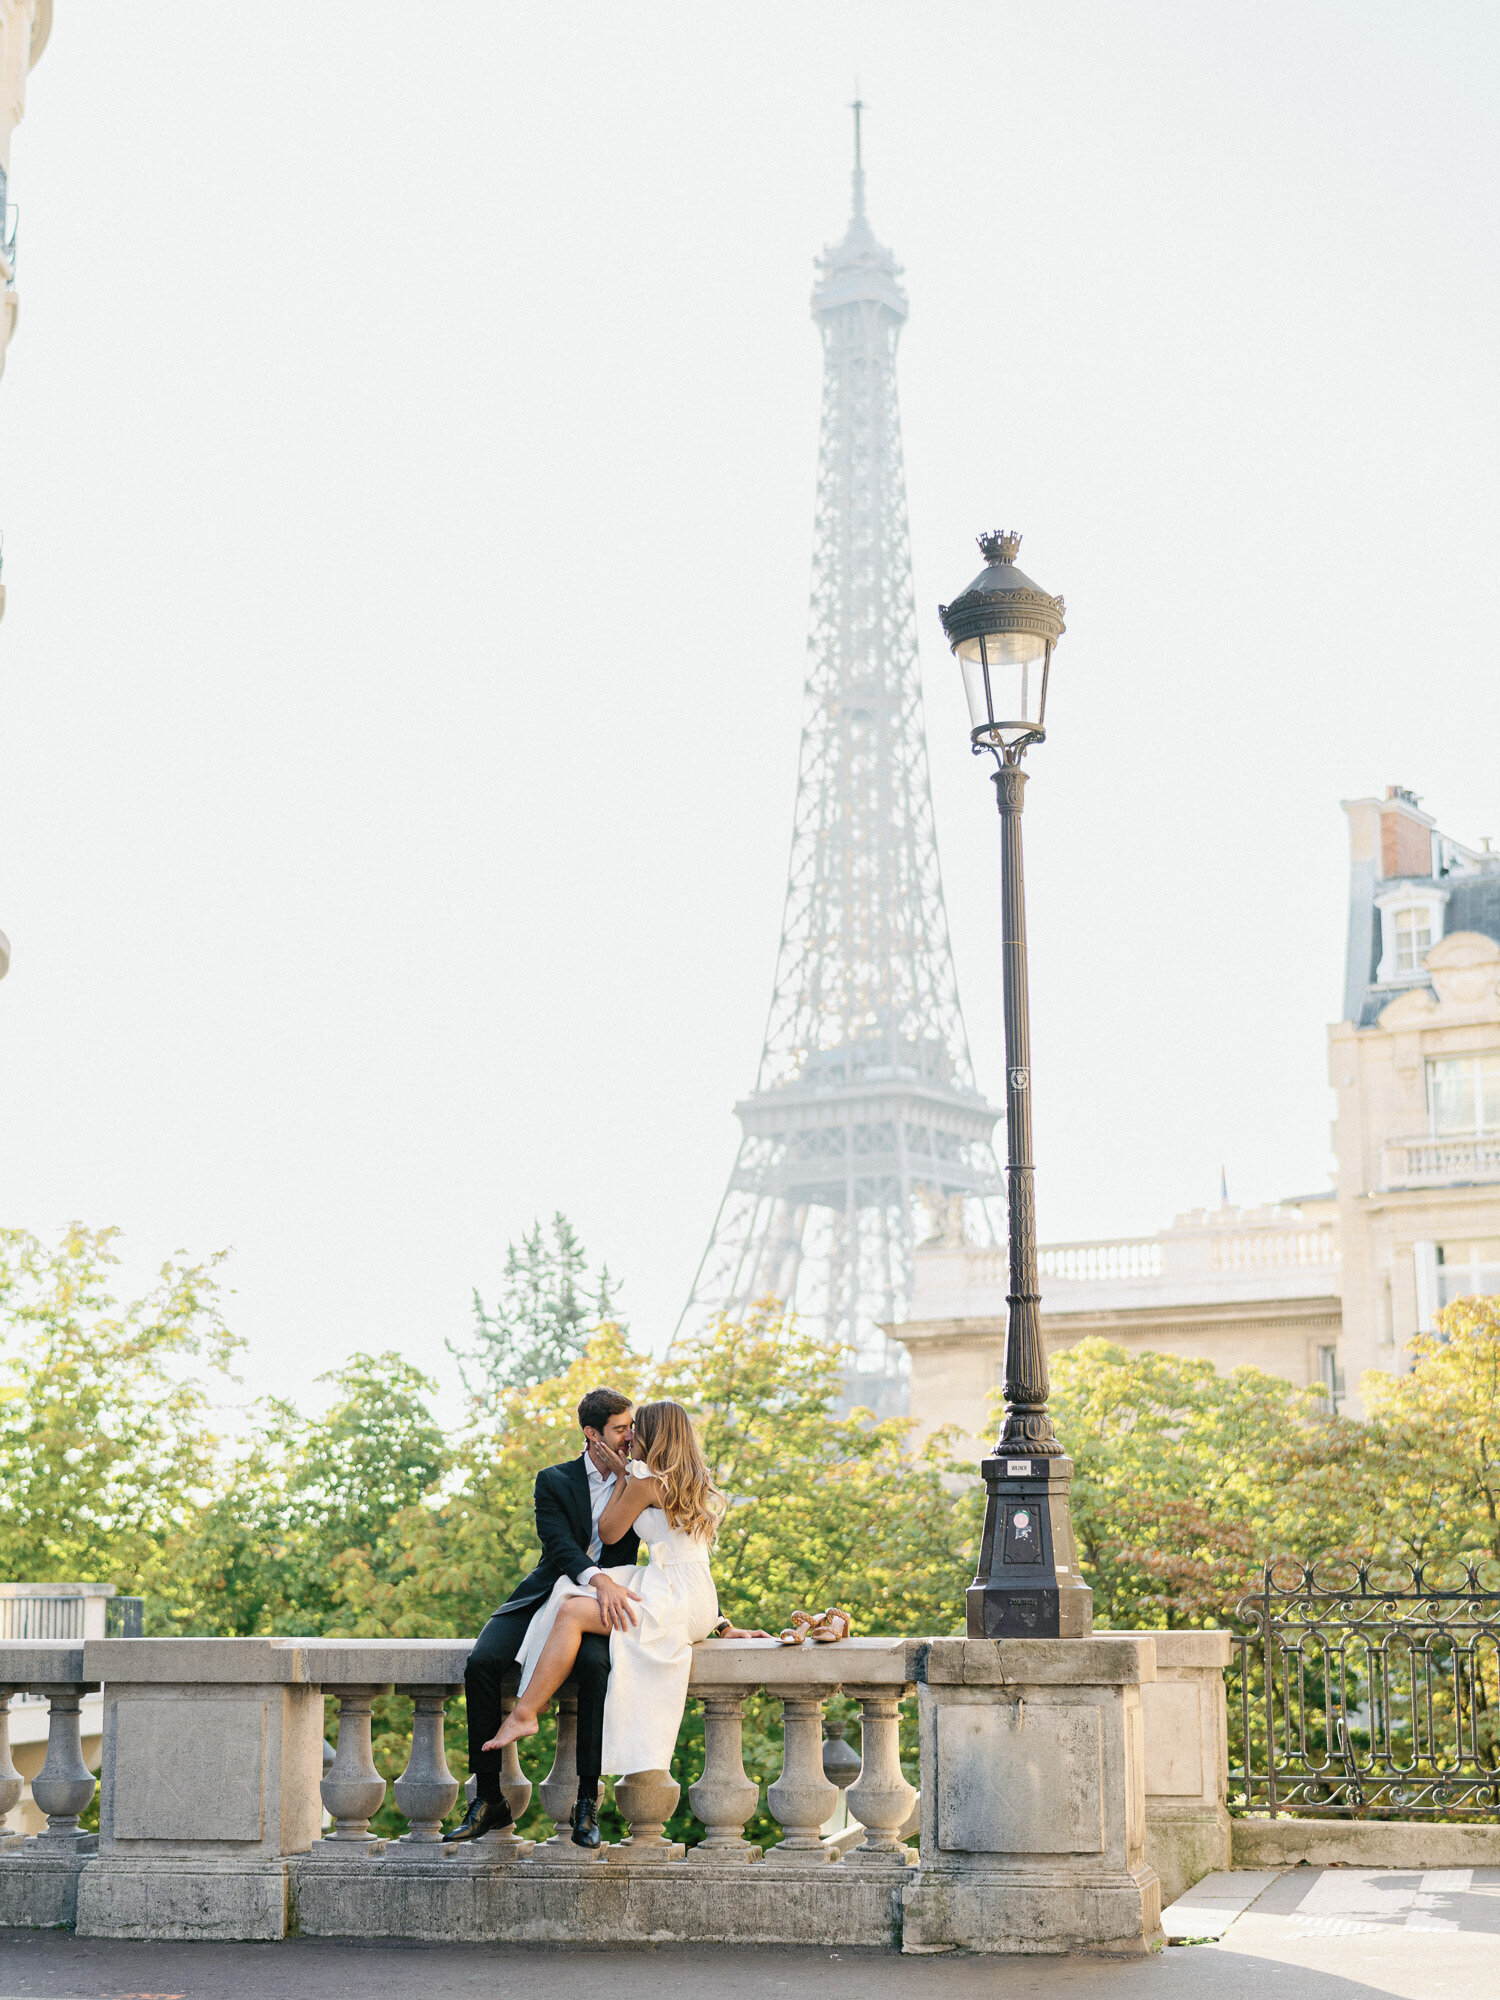 Christine & Kyle Paris Photosession by Tatyana Chaiko photographer in France-63